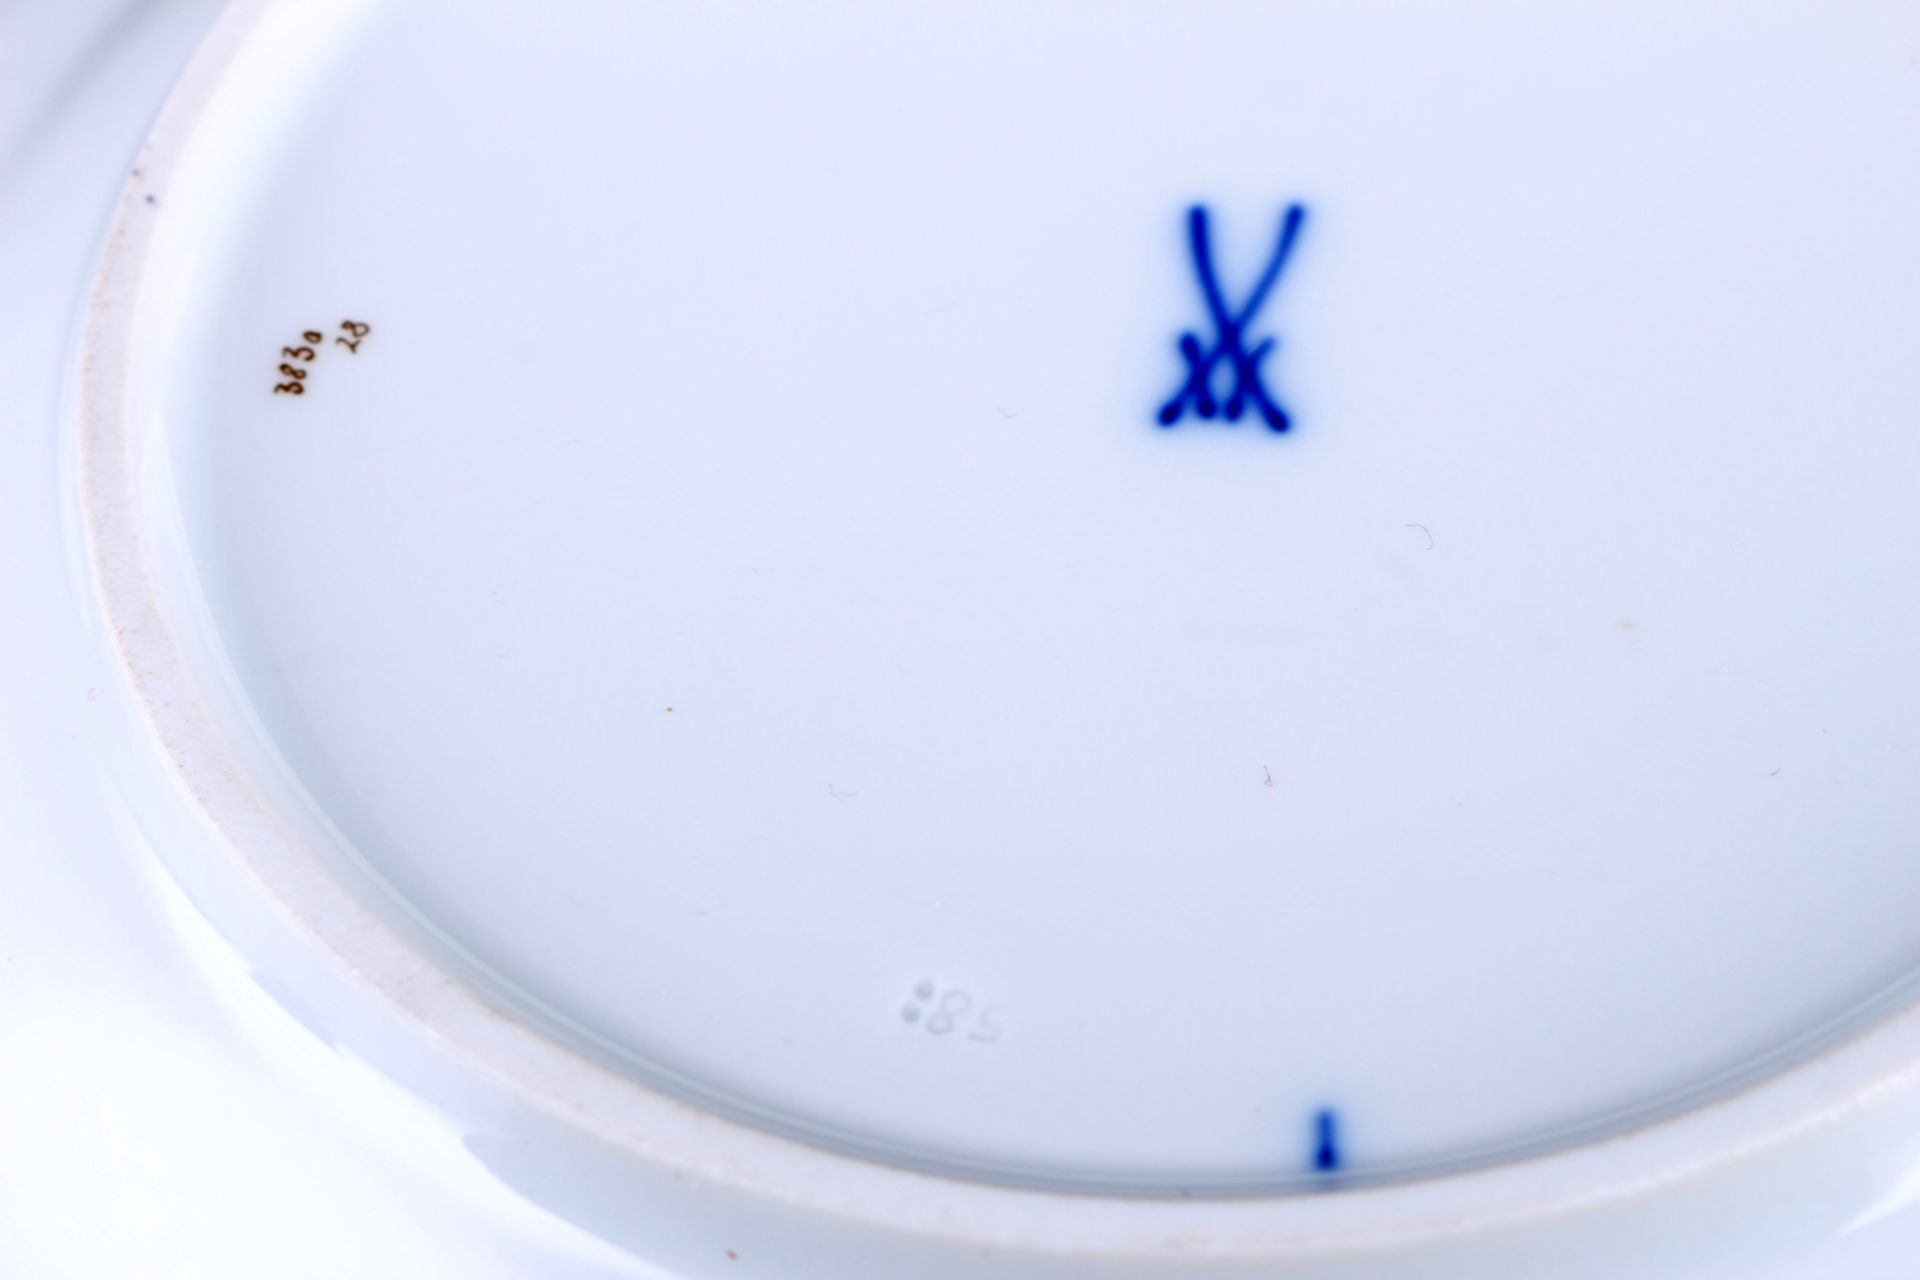 Meissen B-Form royal blue coffee cup with dessert plate 1st choice, Kaffeegedeck 1.Wahl, - Image 6 of 7